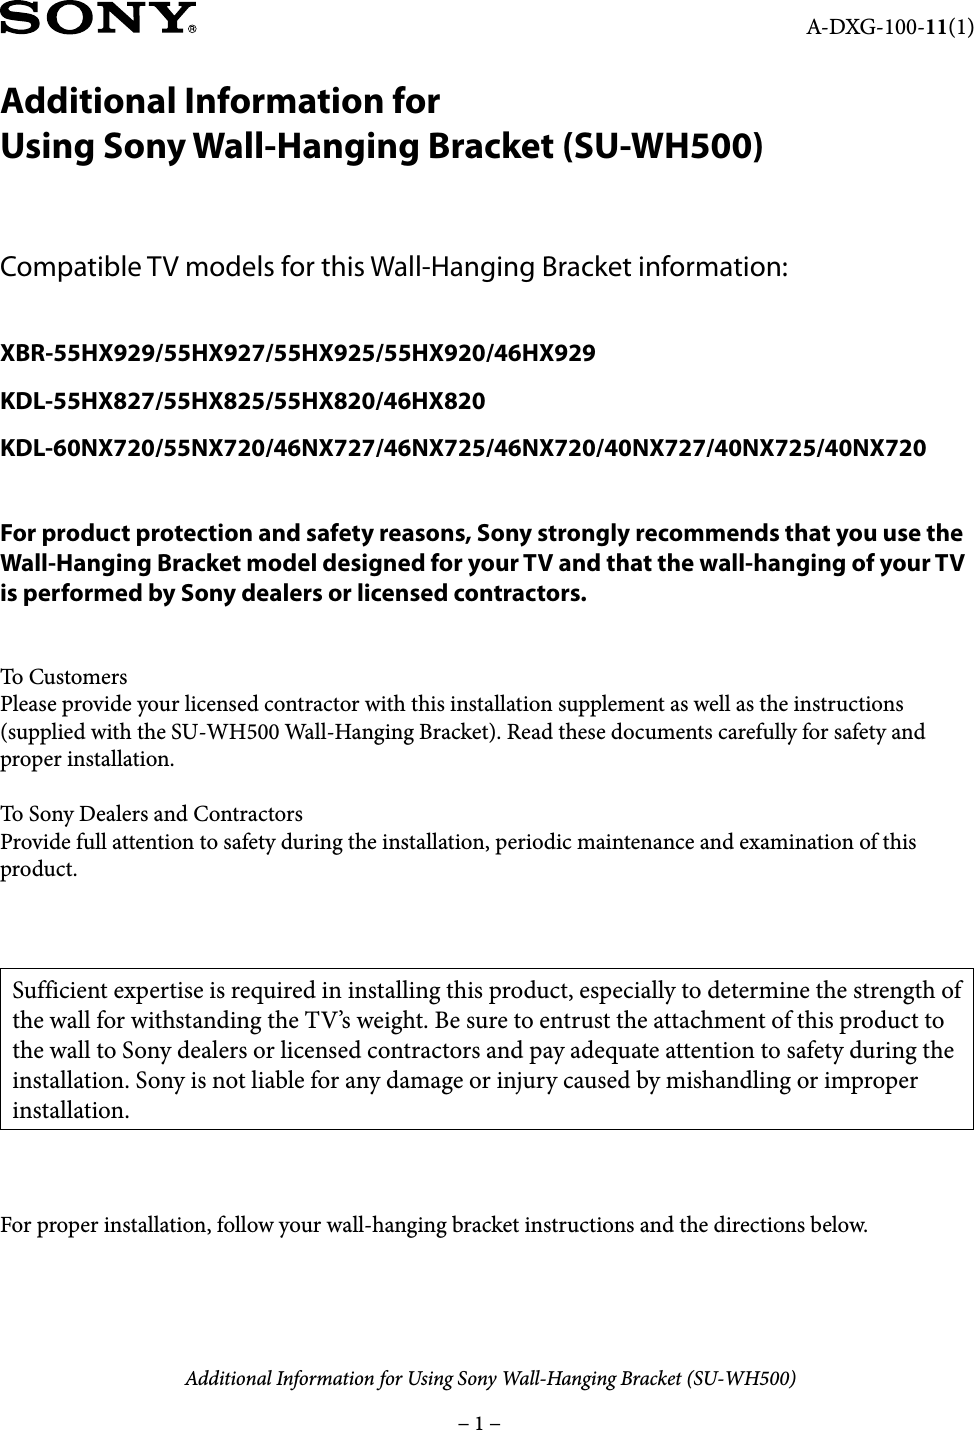 Page 1 of 5 - Sony KDL-46HX820 SU-WH500 User Manual Additional Information For Using Sony® Wall-Hanging Bracket (SU-WH500) Flyer ADXG100111